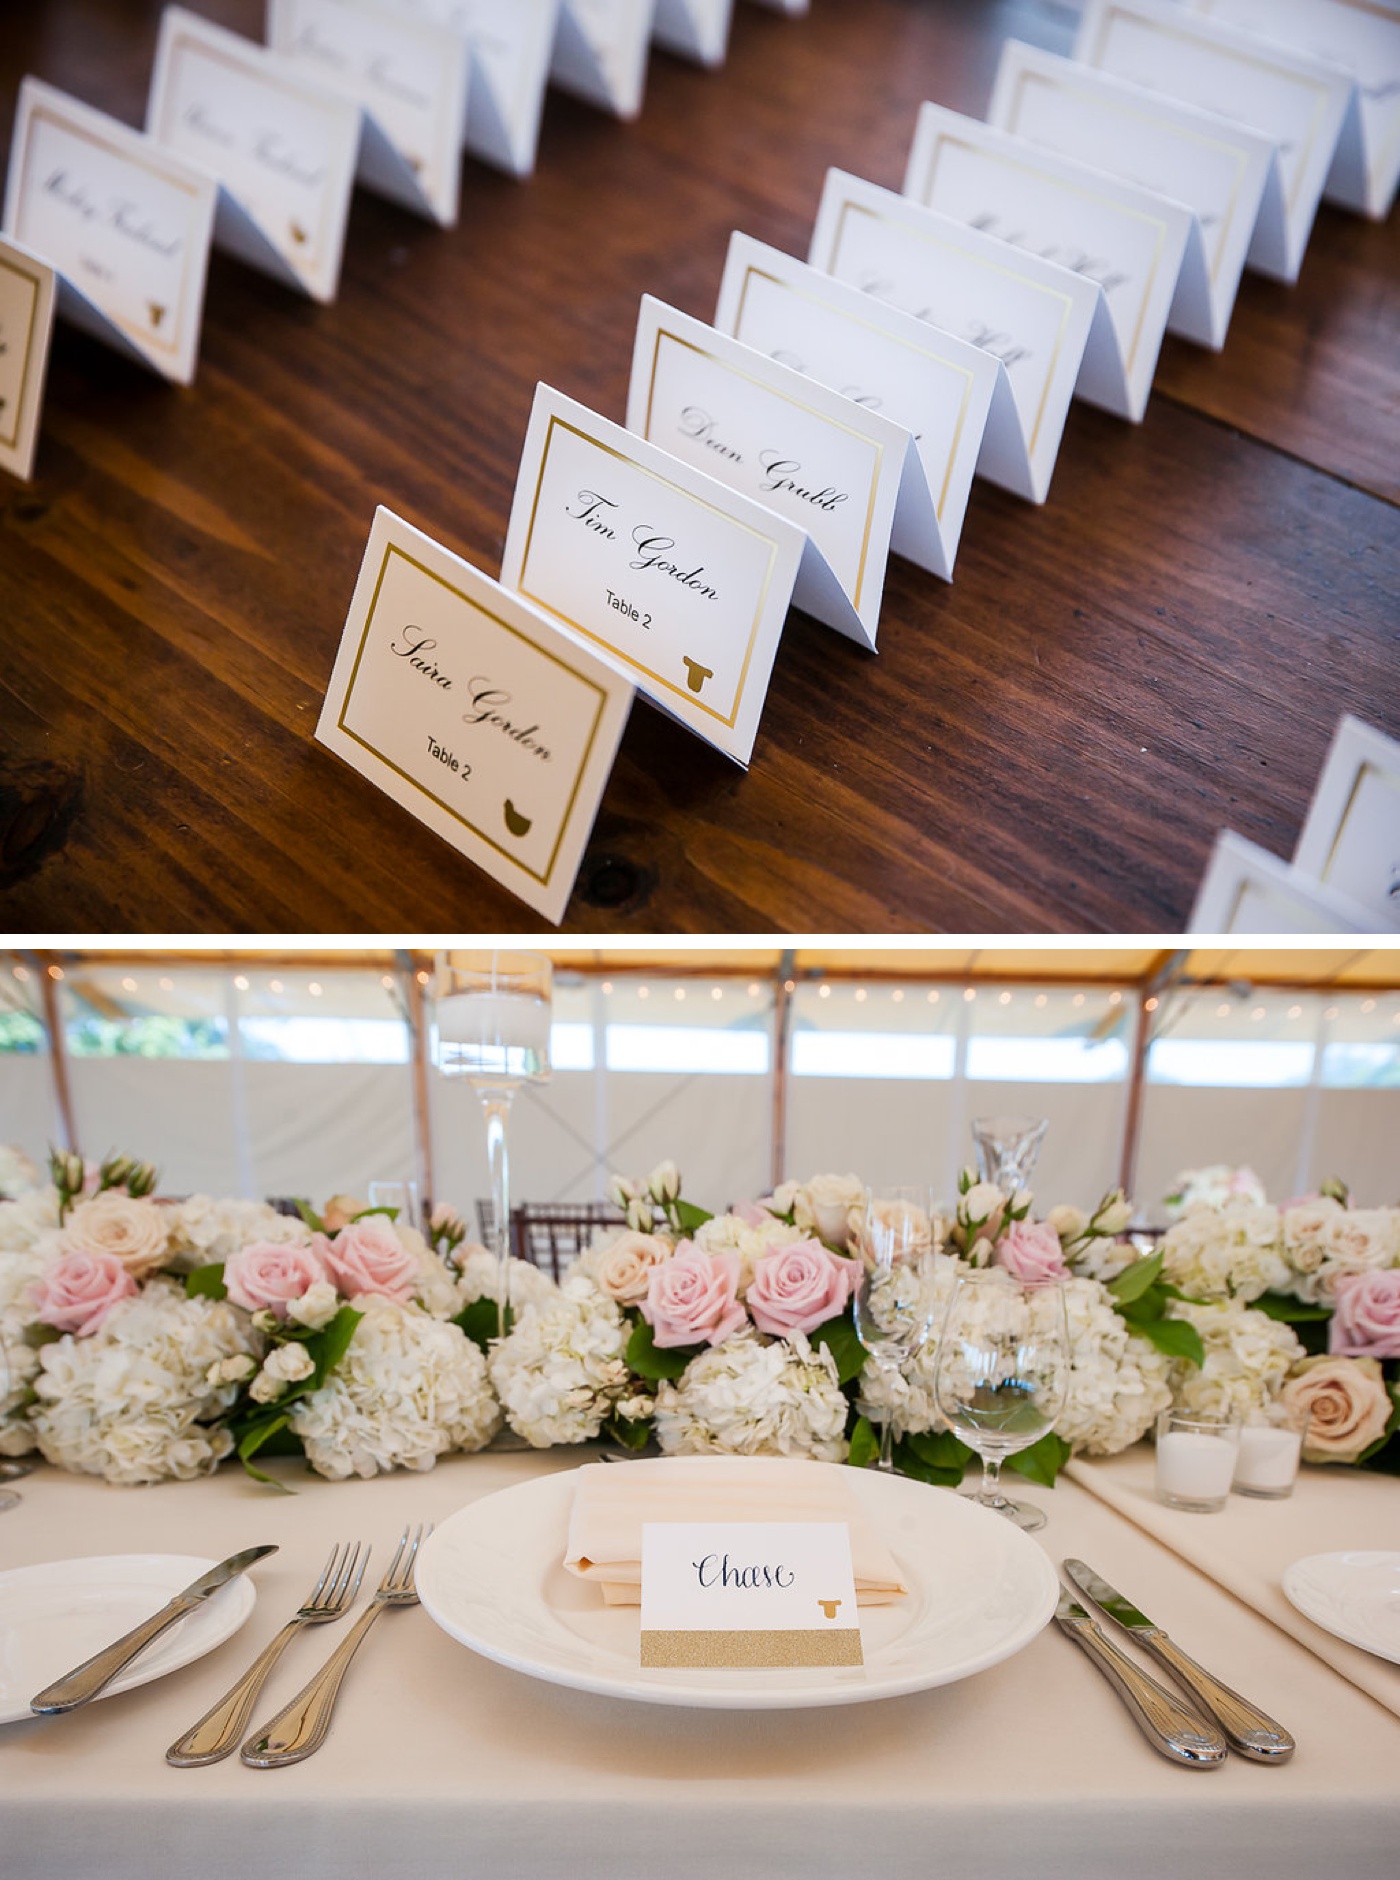 Floral centerpiece with pink roses and white hydrangeas at a summer wedding